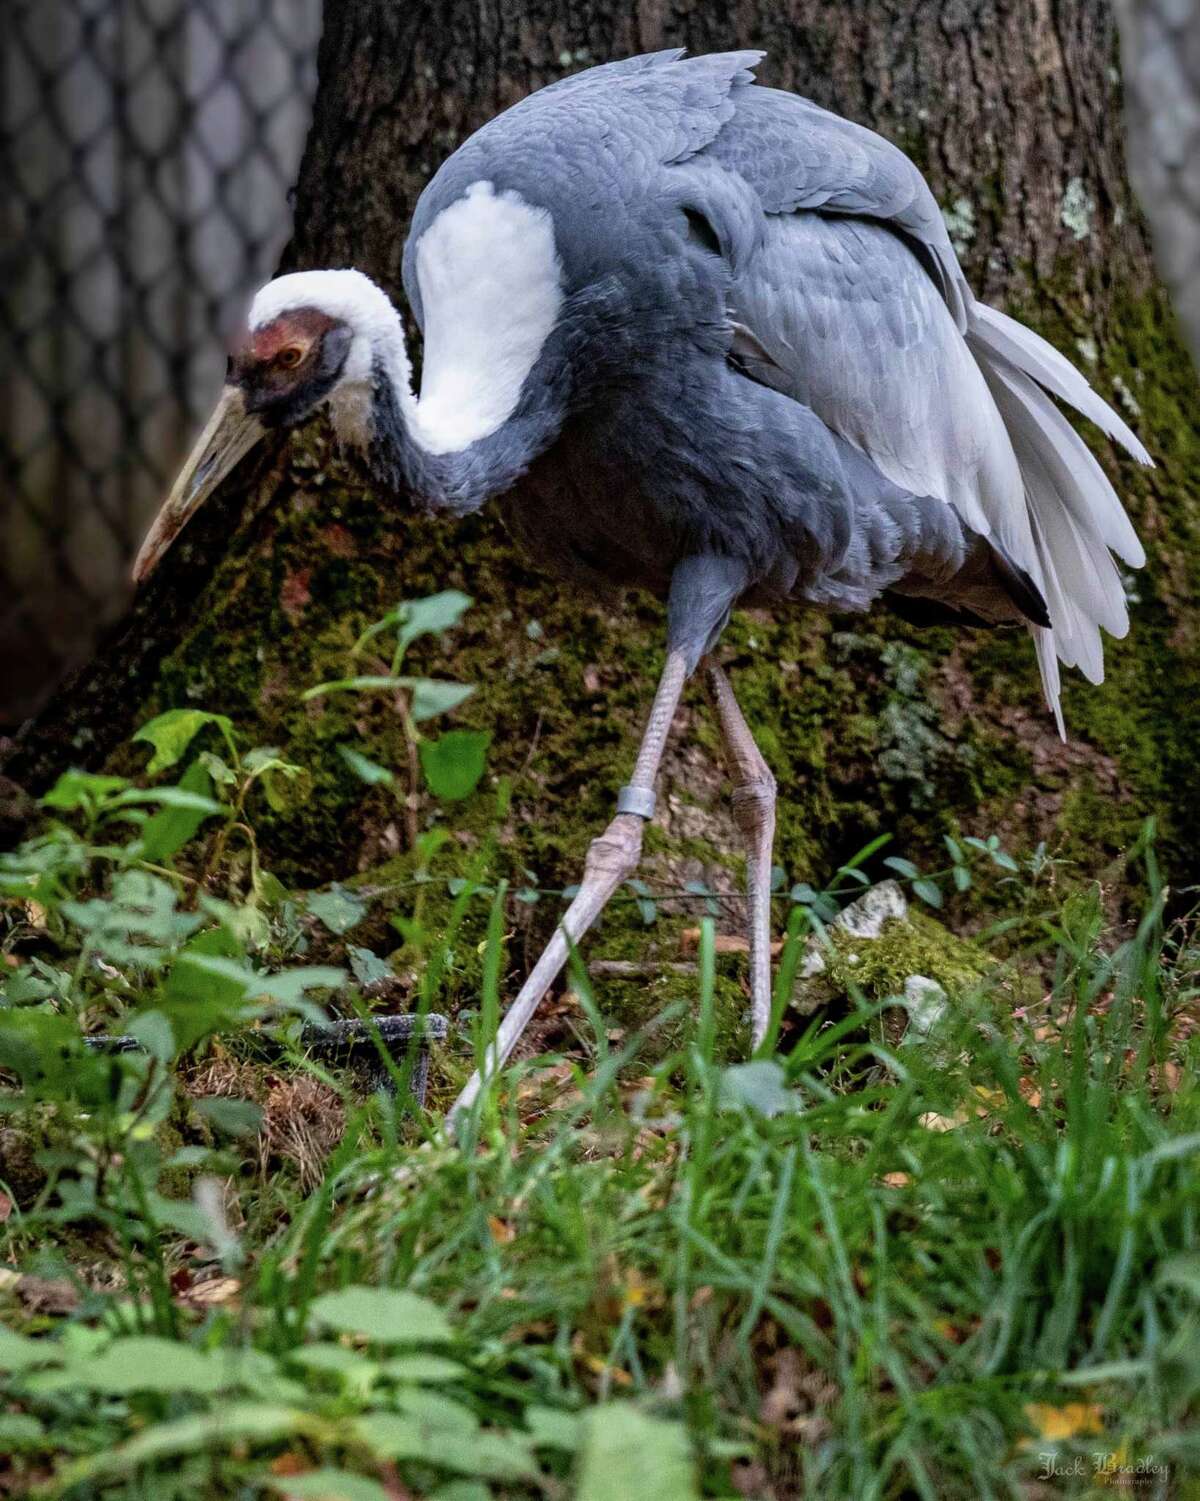 Cora, the white-naped crane, at the Beardsley Zoo in Bridgeport, Conn.